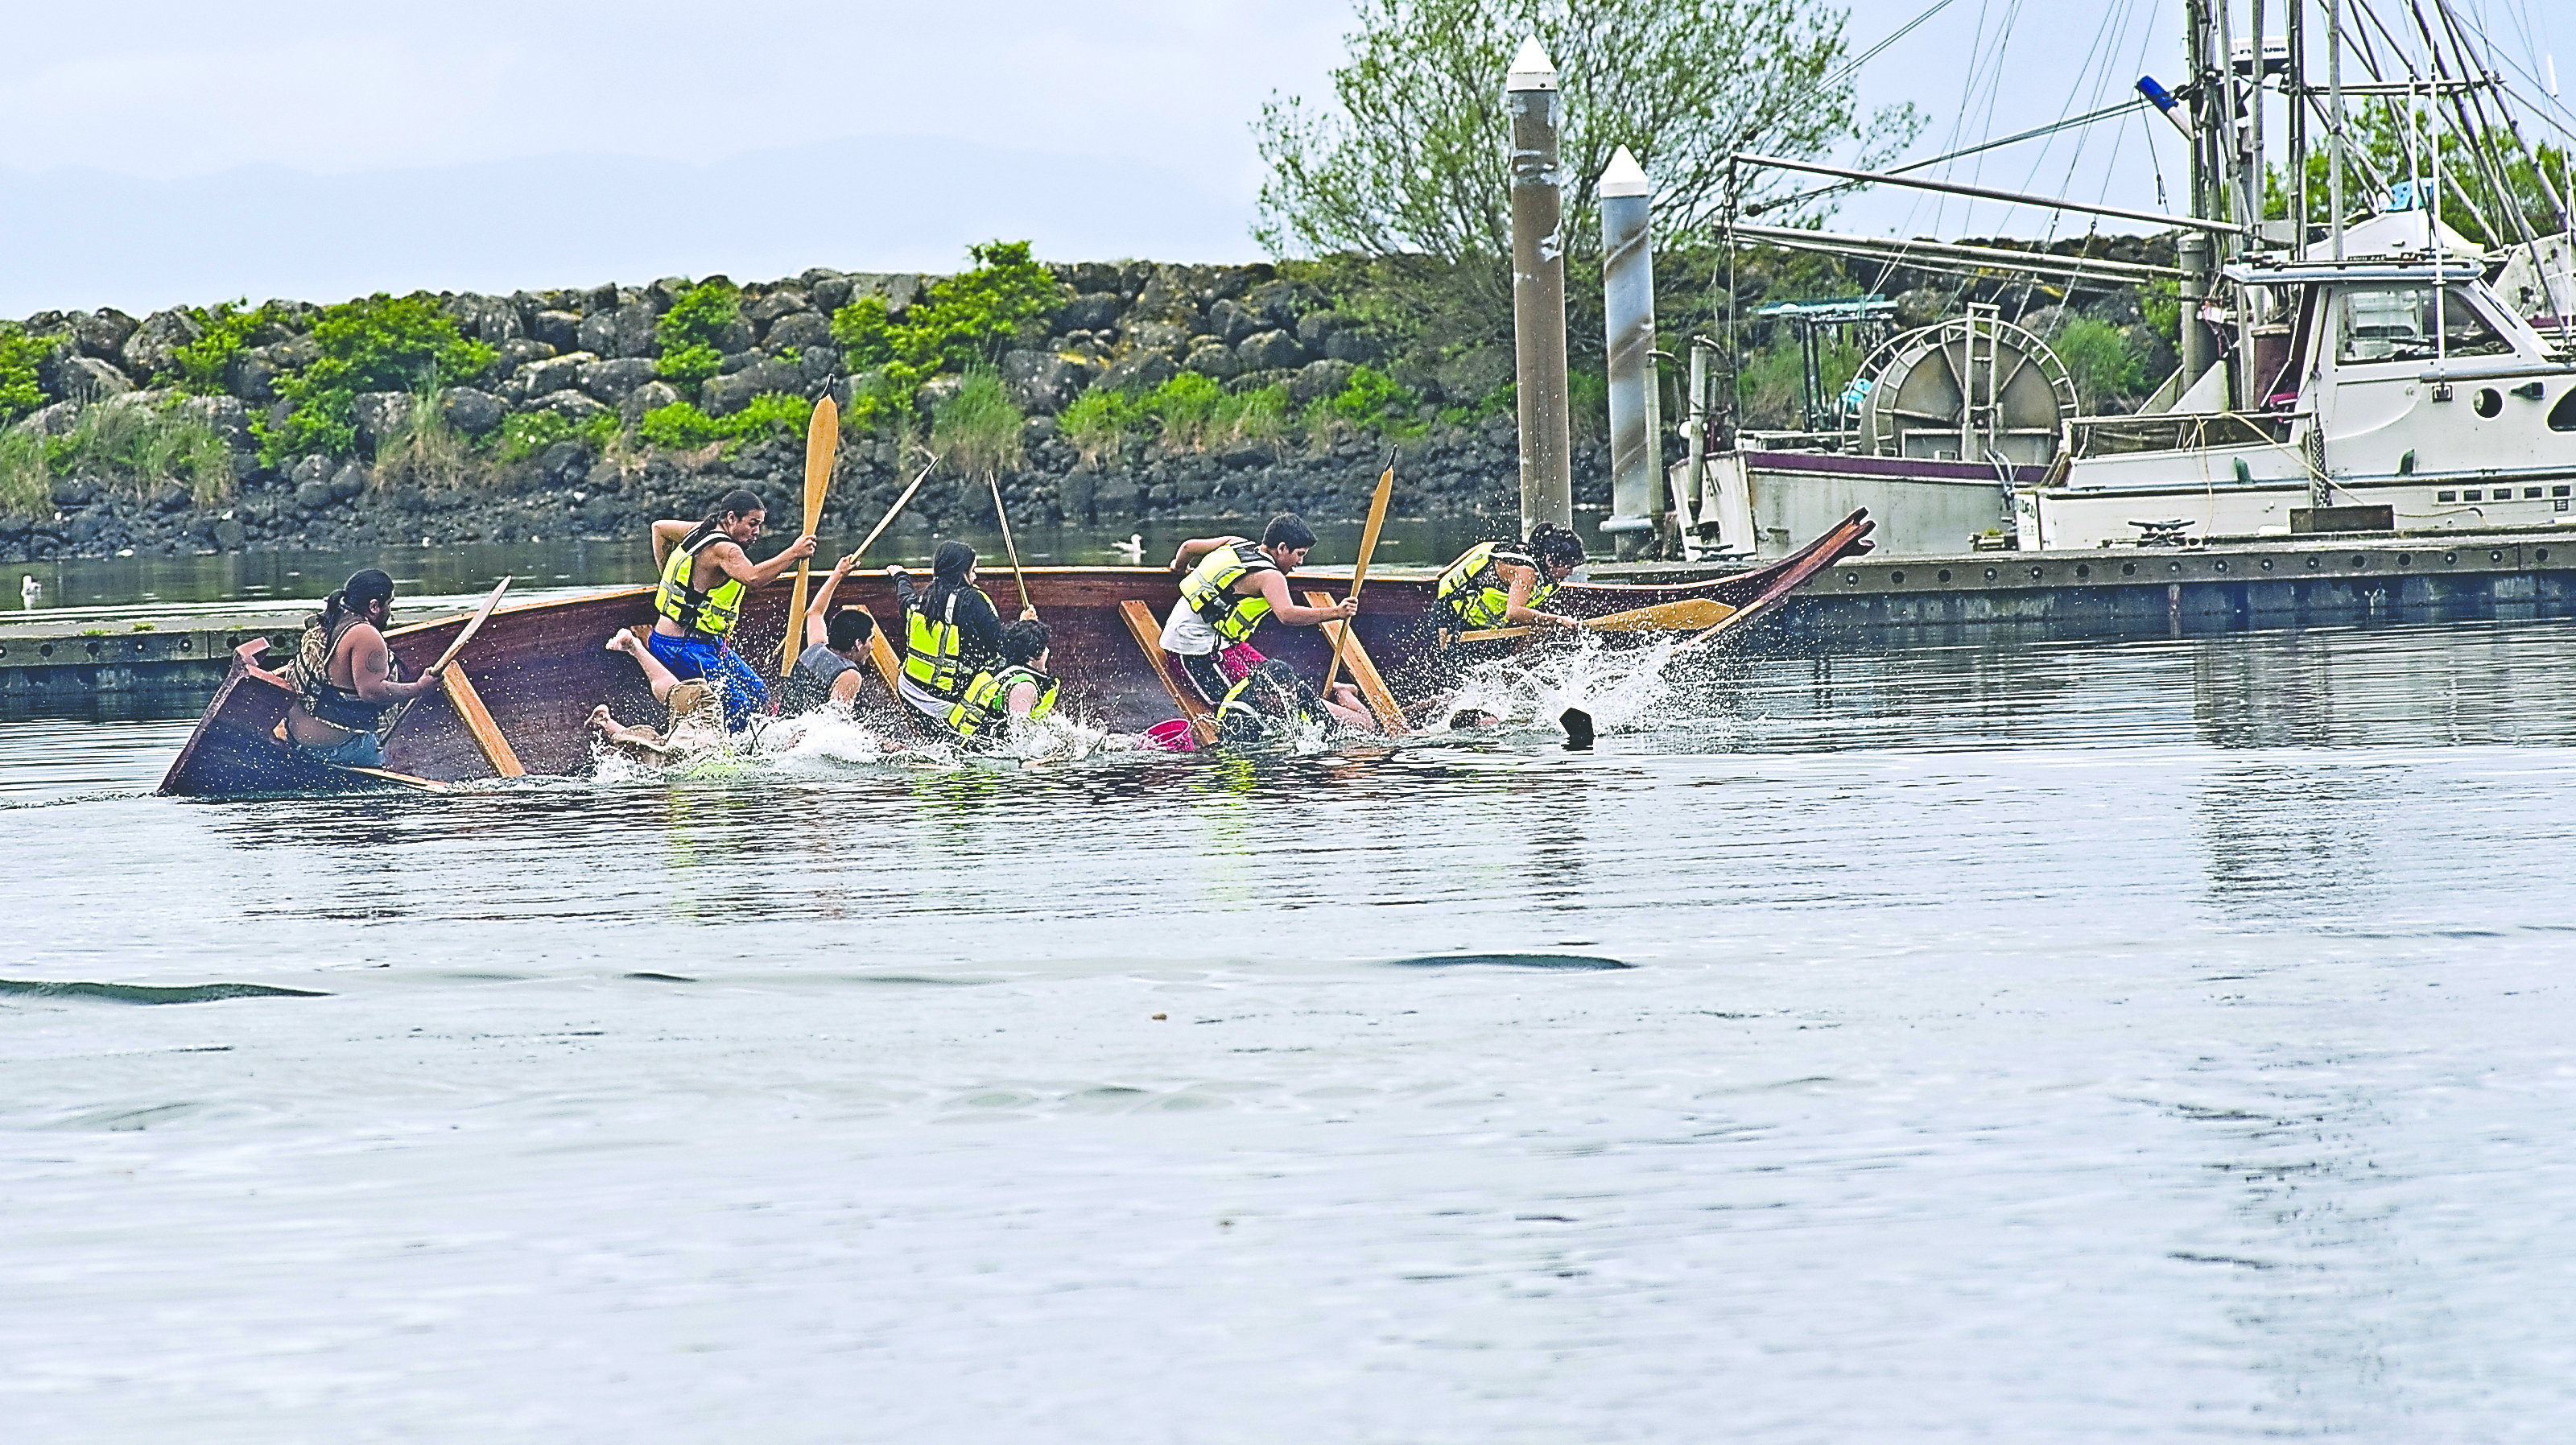 Canoe Journey participants practice tipping over their canoes in the Makah Marina in Neah Bay during a training session hosted by the Makah and Hoh tribes. Debbie Ross-Preston